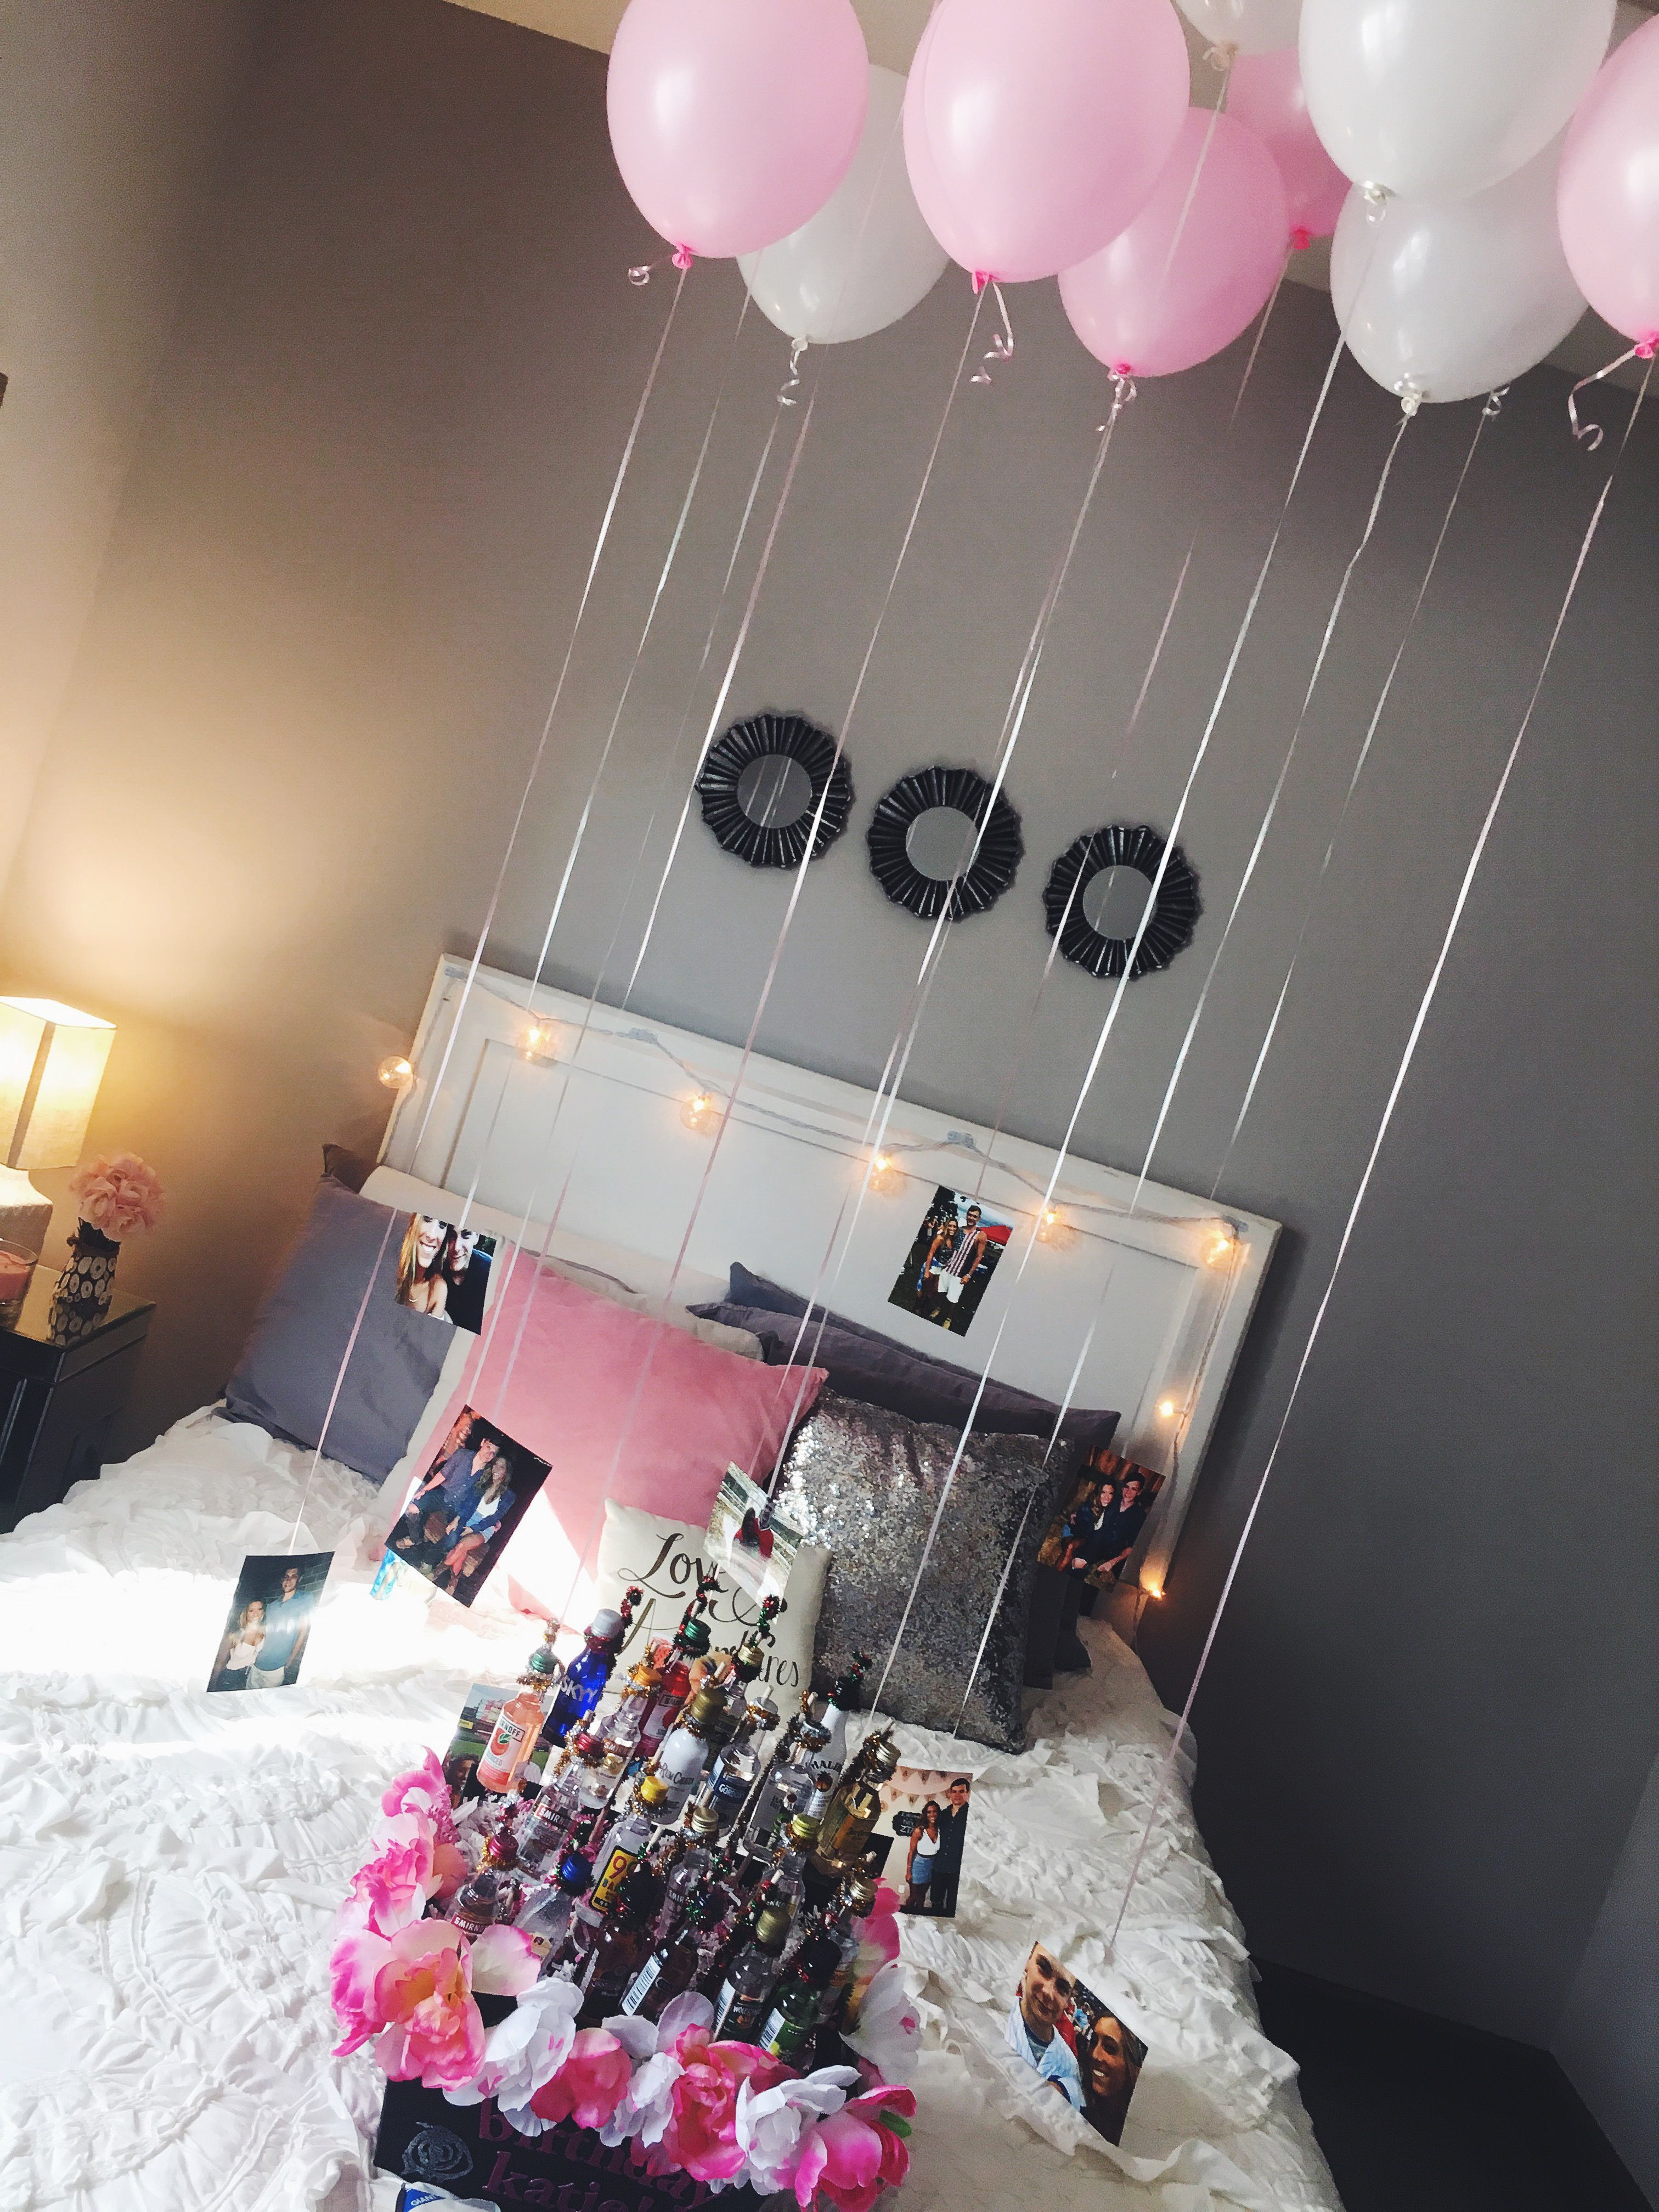 Gift Ideas To Get Your Girlfriend
 easy and cute decorations for a friend or girlfriends 21st